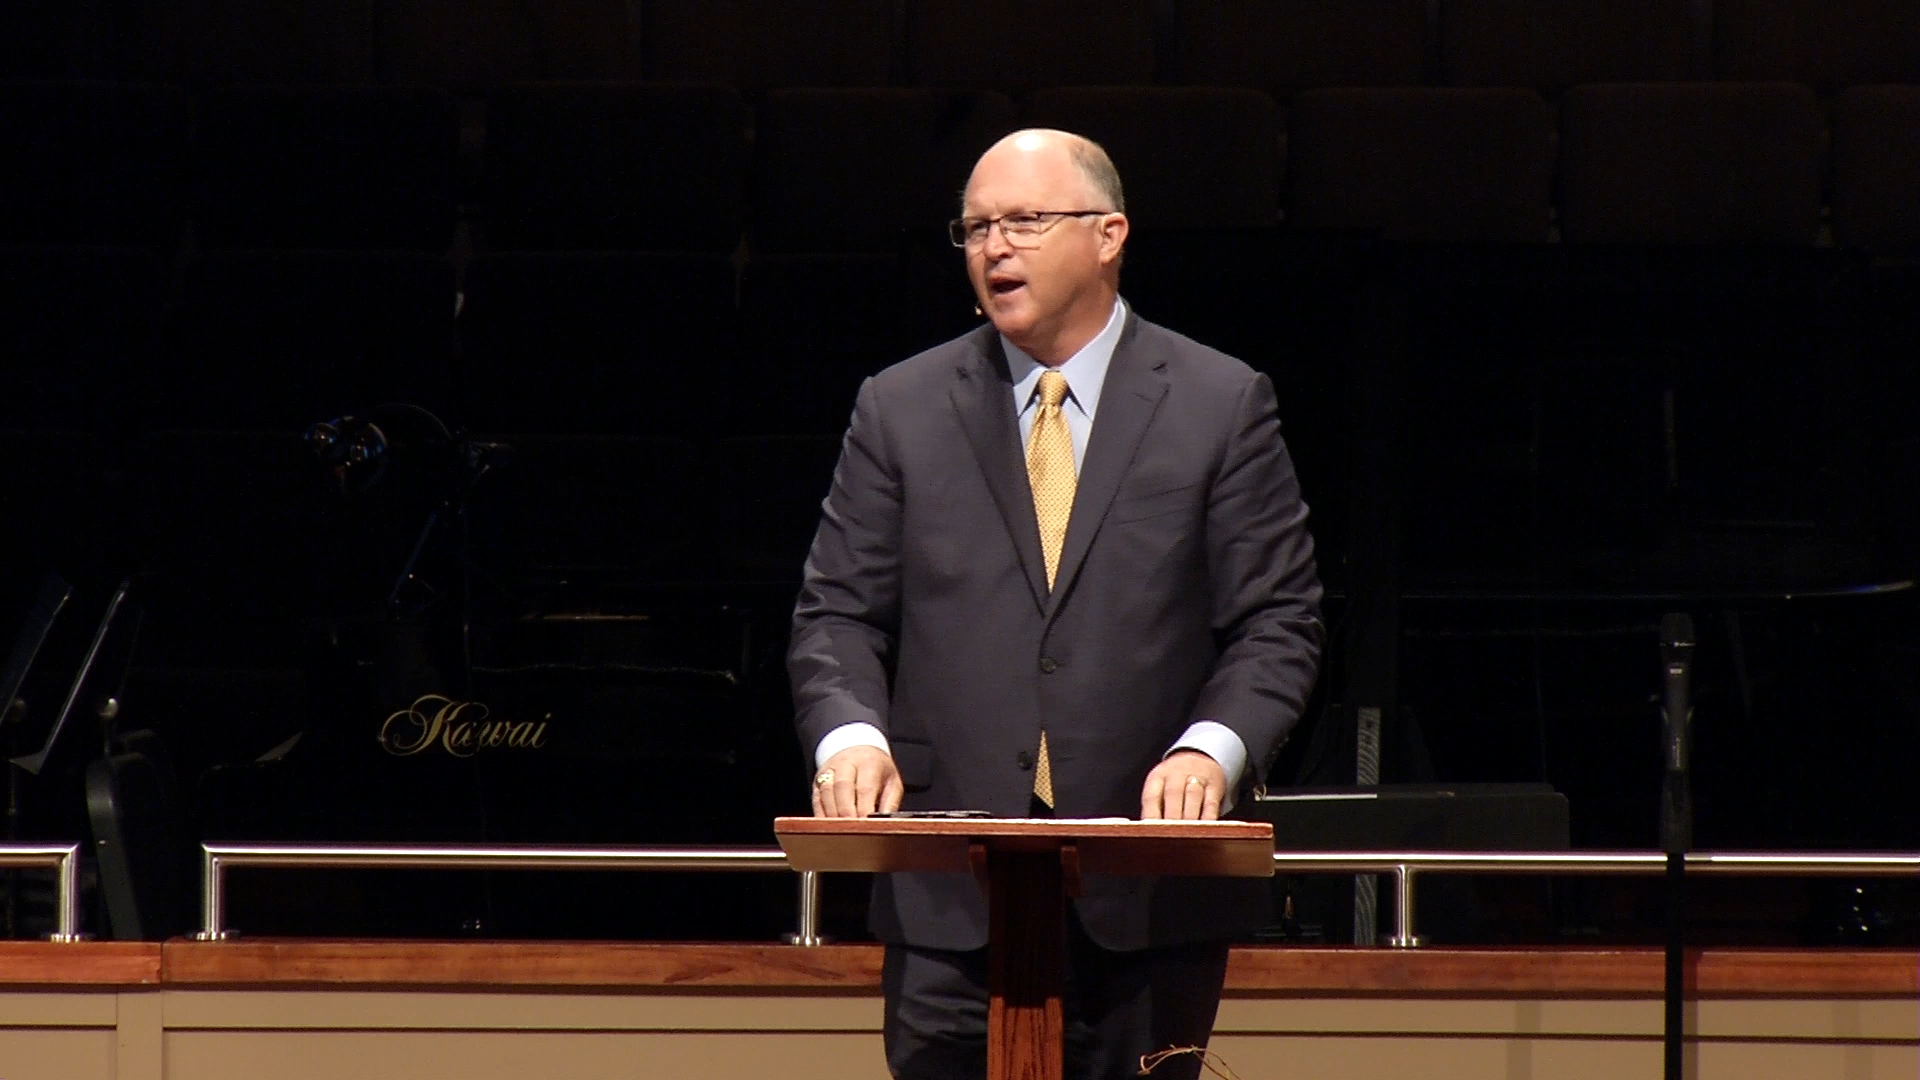 Pastor Paul Chappell: Modern Trends and Biblical Truths Part 1